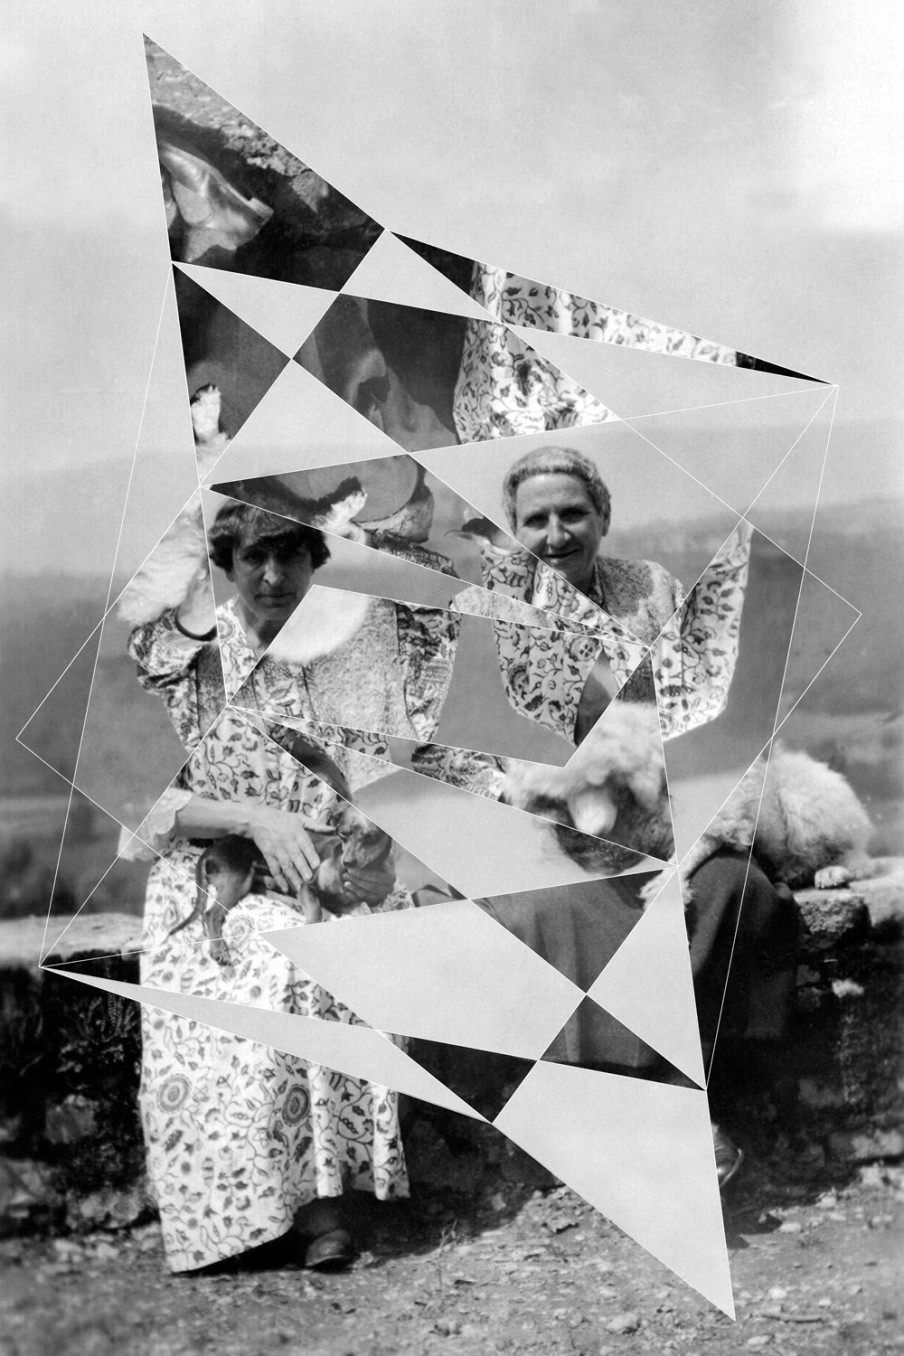 Andrea Geyer, Constellations (Alice B. Toklas and Gertrude Stein with Pepe and Basket), 2018, Hand-cut archival print on rag paper, 98.7 x 66 cm, 38 7/8 x 26 in, Framed: 101.2 x 68.5 cm, 39 7/8 x 27 in